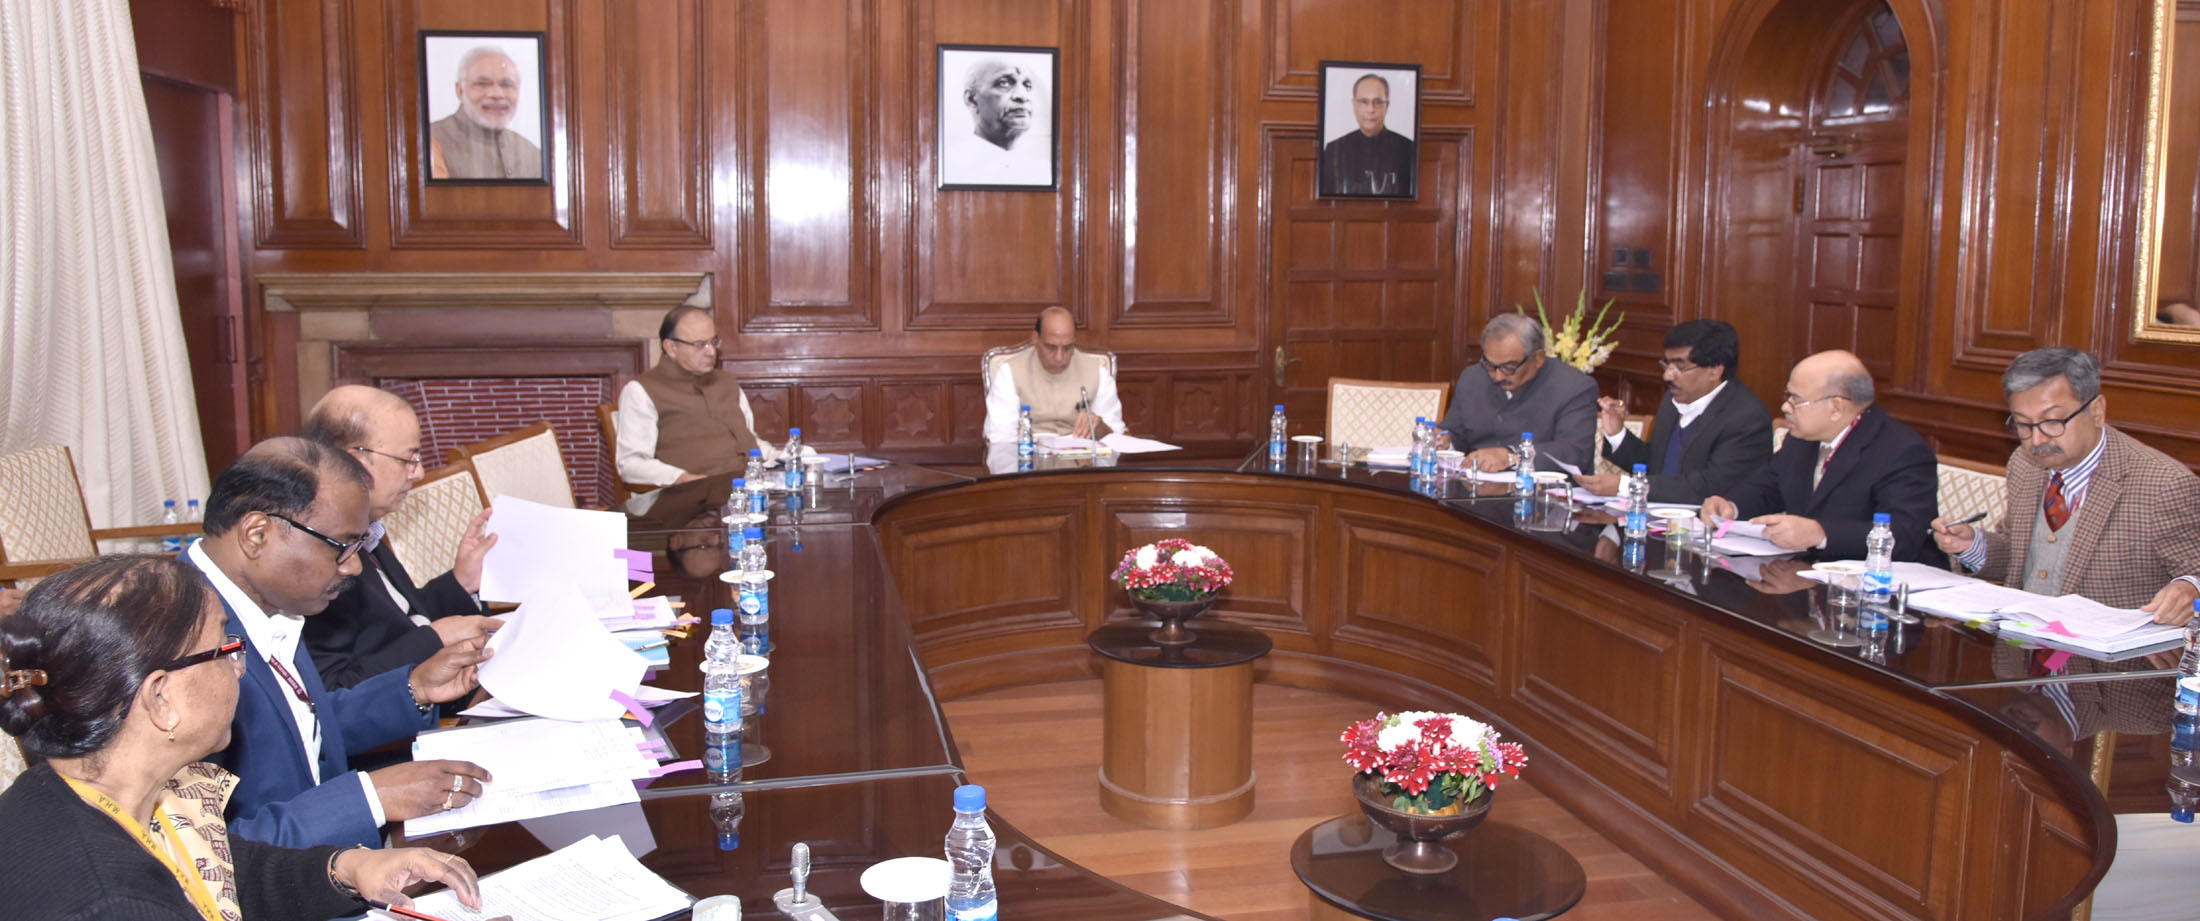 The Union Home Minister, Shri Rajnath Singh chairing a meeting of the High Level Committee (HLC), in New Delhi on February 15, 2016. 	The Union Minister for Finance, Corporate Affairs and Information & Broadcasting, Shri Arun Jaitley, the Union Home Secretary, Shri Rajiv Mehrishi and senior officers of the Ministries of Home, Finance and Agriculture are also seen.